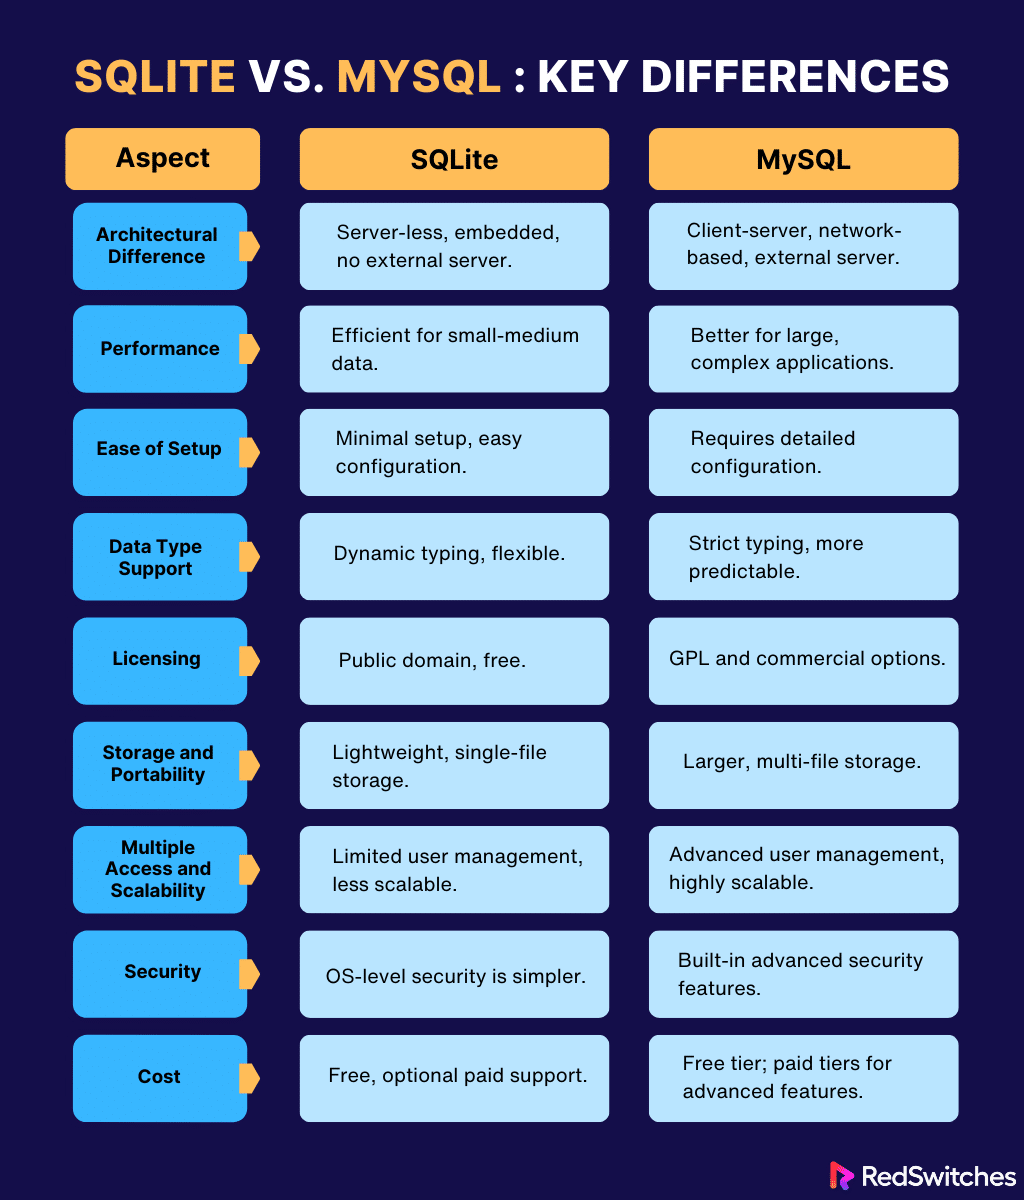 Key differences between SQLite and MySQL